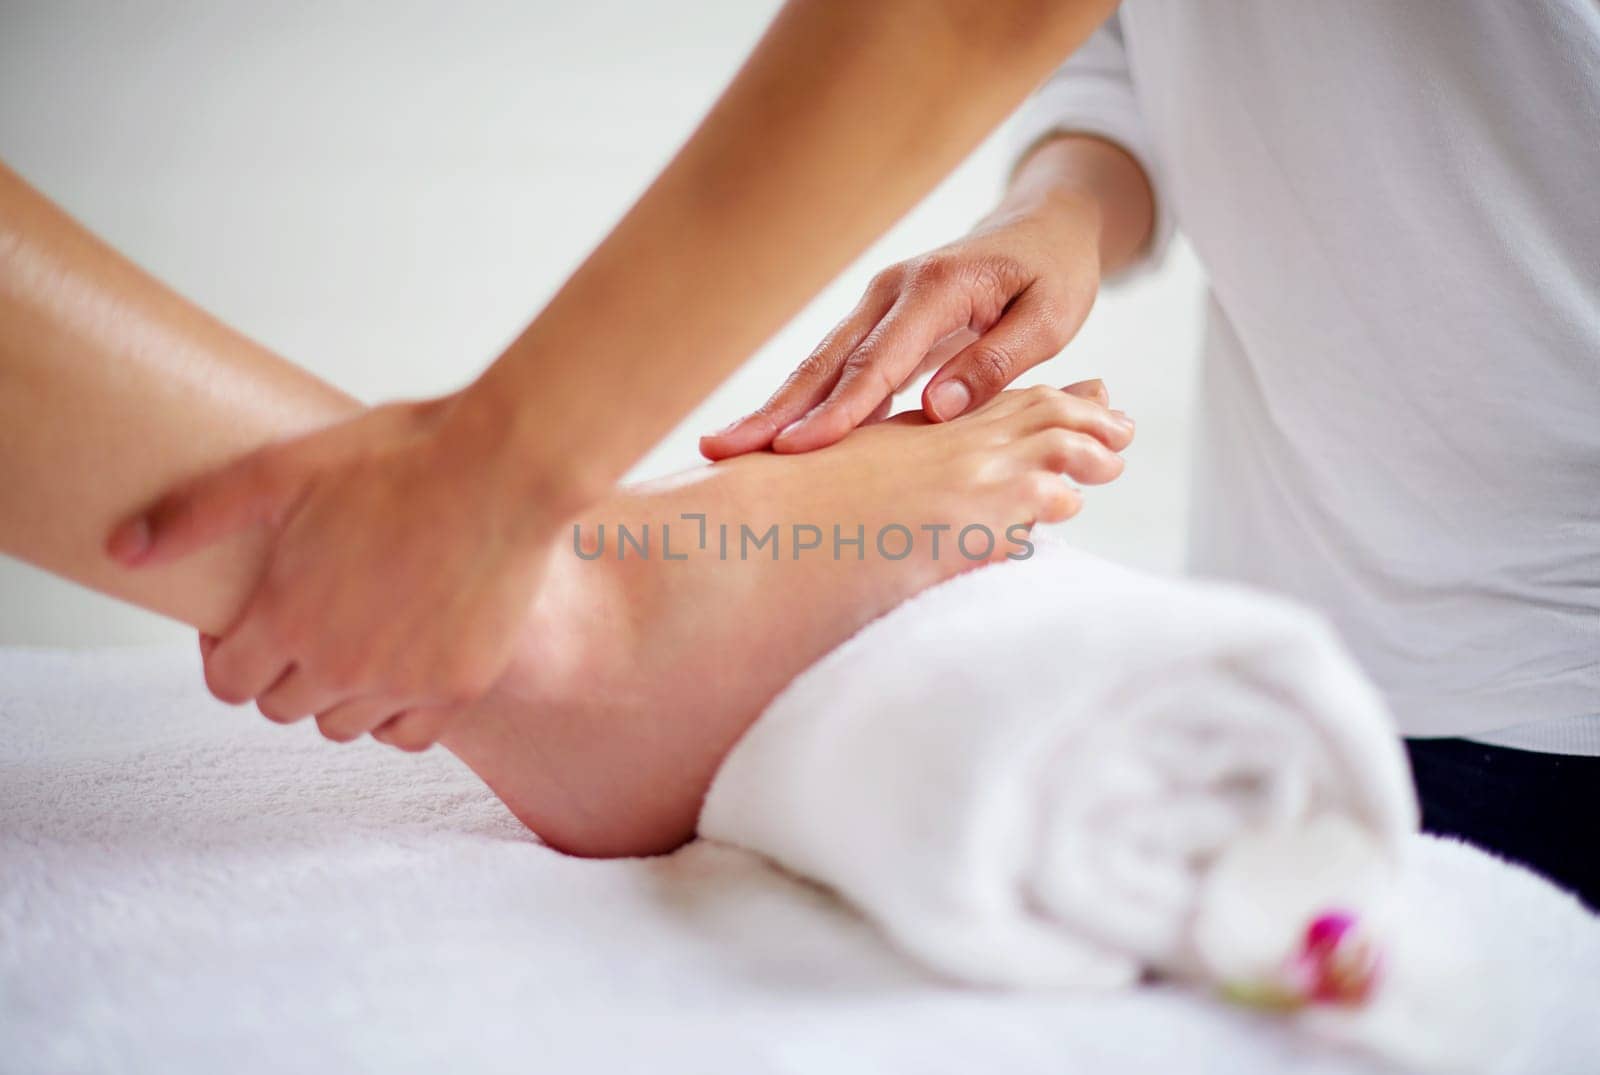 Foot, hands and pressure massage with spa for treatment, beauty and skincare at luxury resort with wellness. Pedicure, cosmetics and people for physical therapy with healing for self care and relief by YuriArcurs